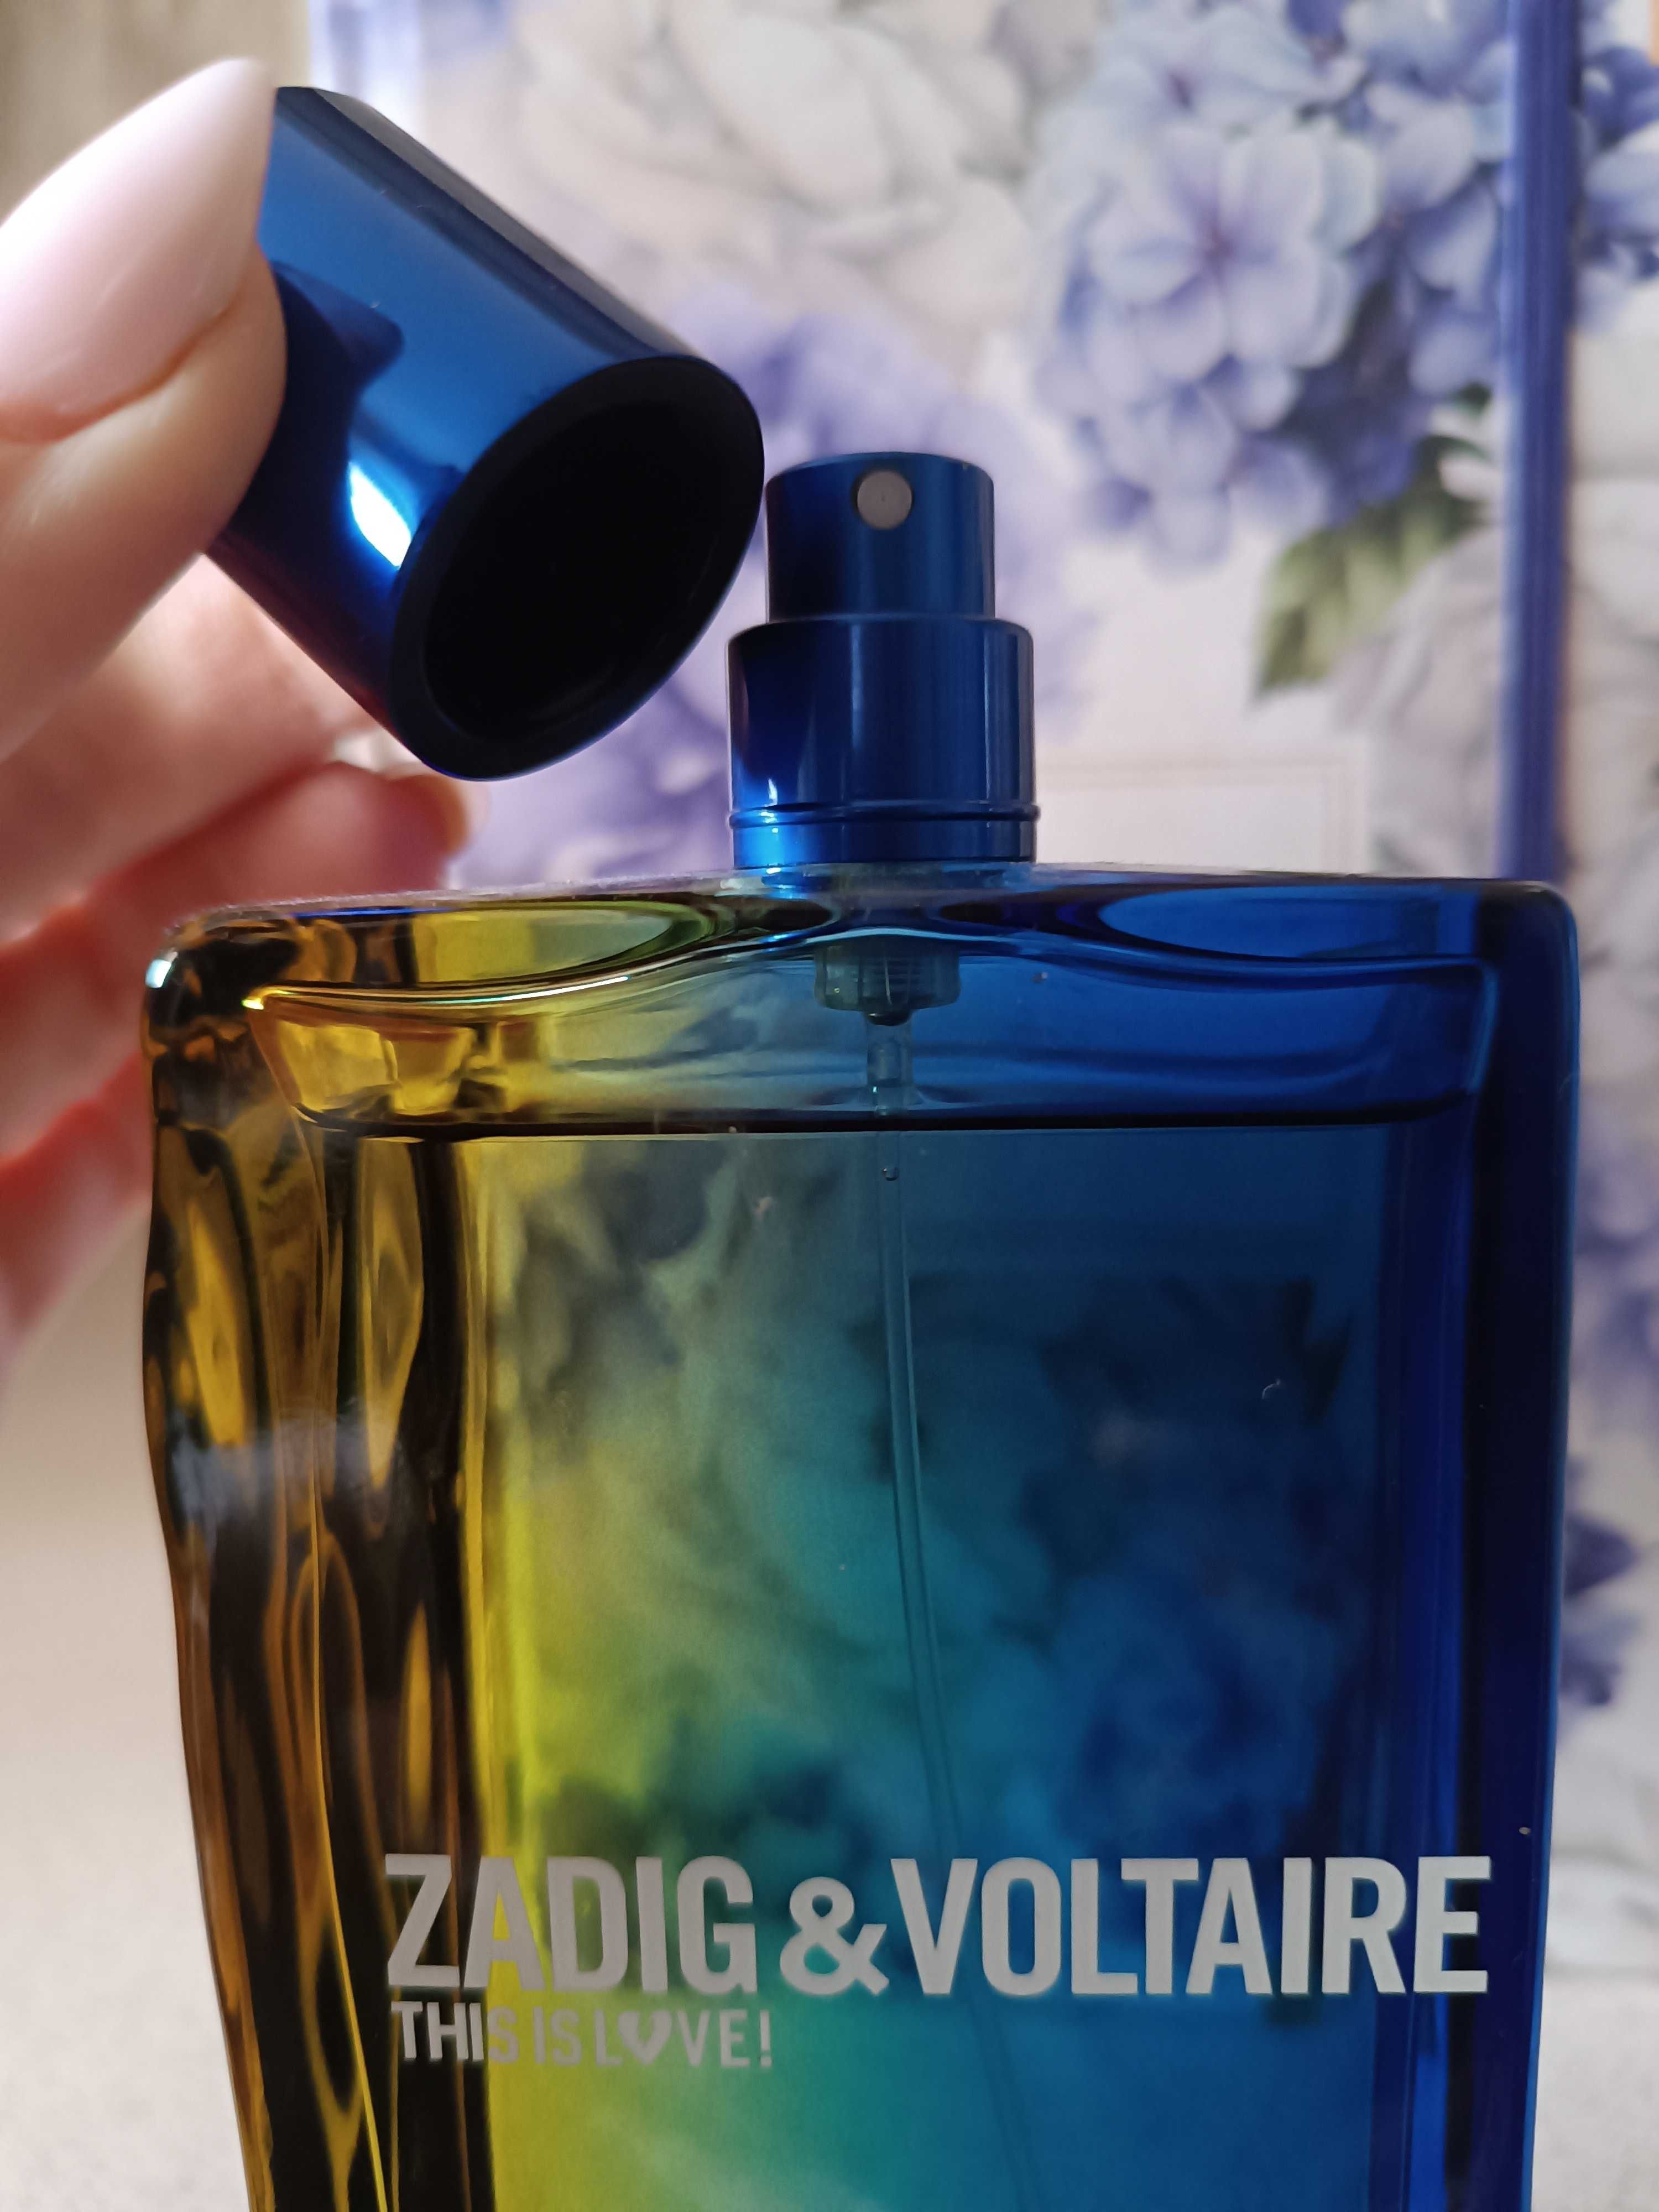 Zadig & Voltaire This is Love EDT 100ml